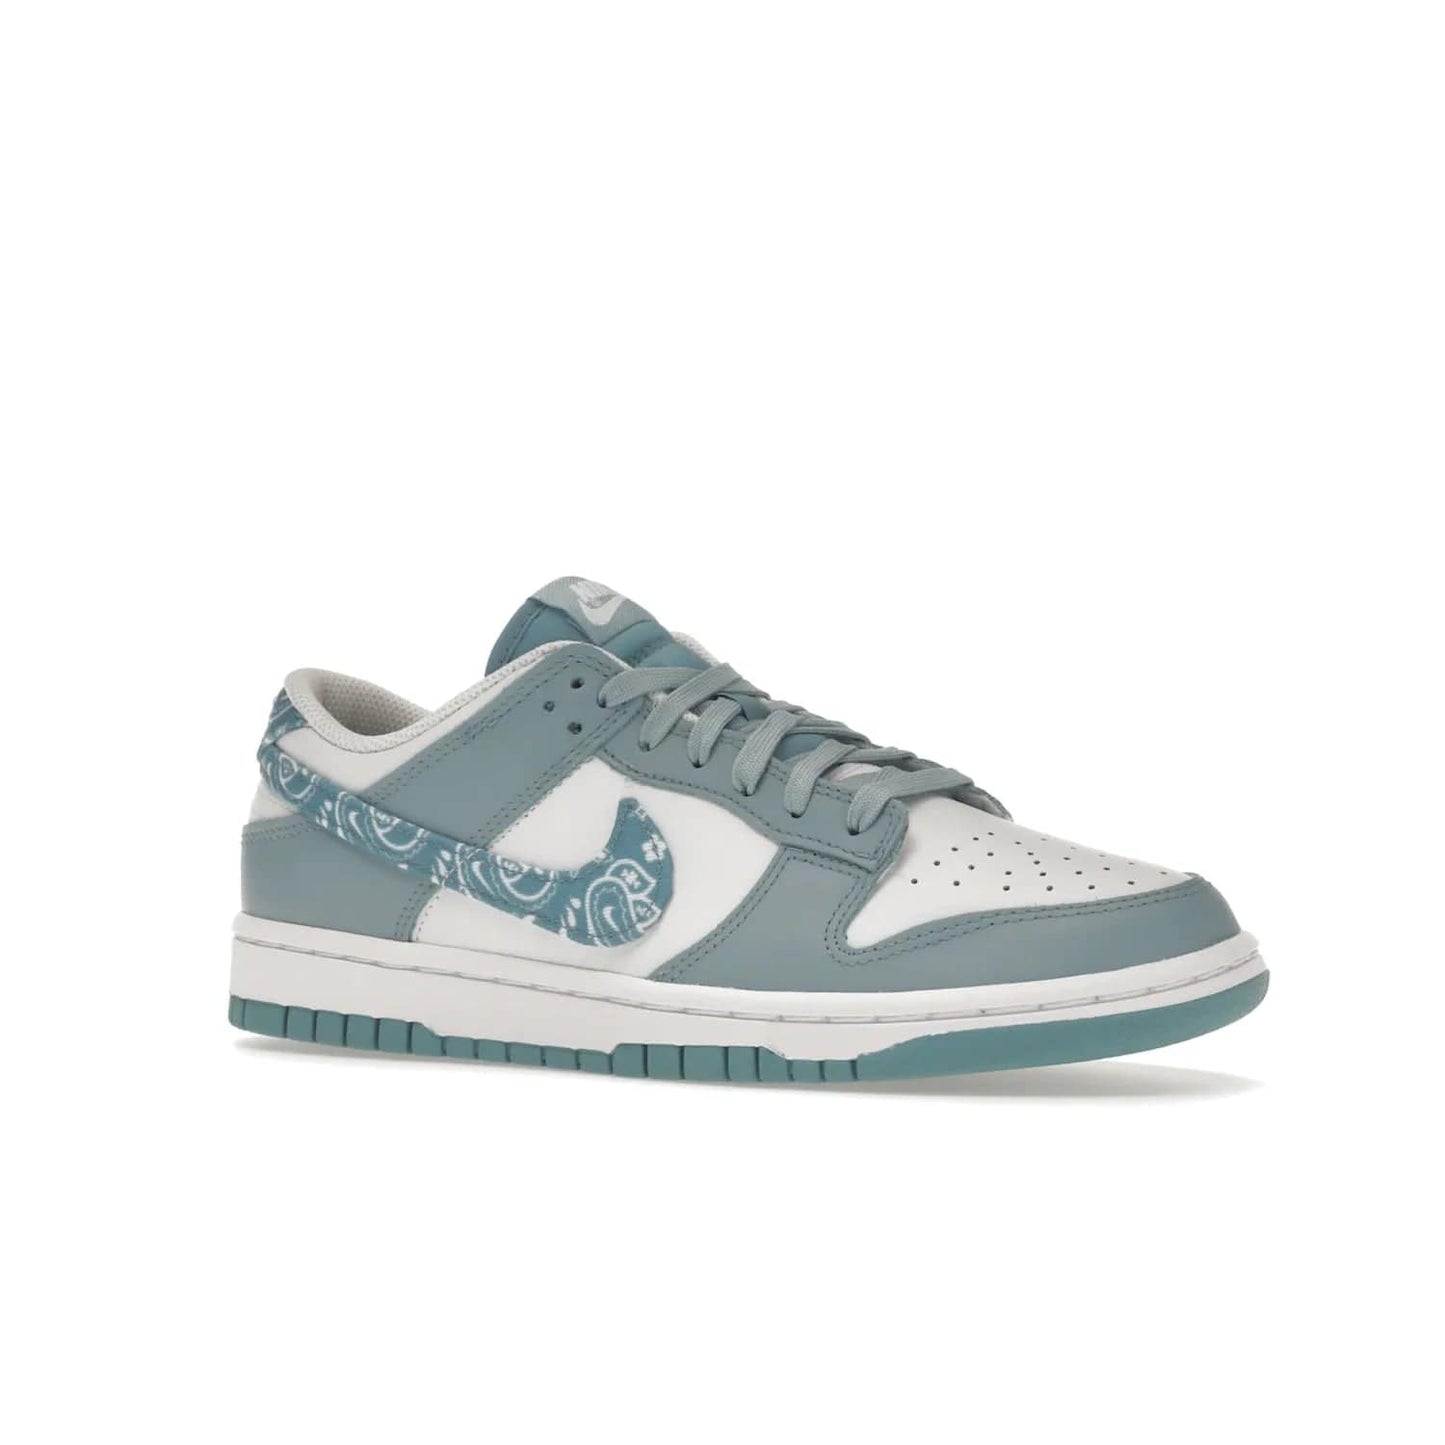 Nike Dunk Low Essential Paisley Pack Worn Blue (Women's) - Image 4 - Only at www.BallersClubKickz.com - Get the Nike Dunk Low Essential Paisley Pack Worn Blue (Women's) for style and comfort. White leather construction, light blue leather overlays, canvas Swooshes and matching heel tabs offer a rich blue hue. Finished by a white and light blue sole, this classic Nike Dunk is the perfect addition to any wardrobe. Released in March 2022.